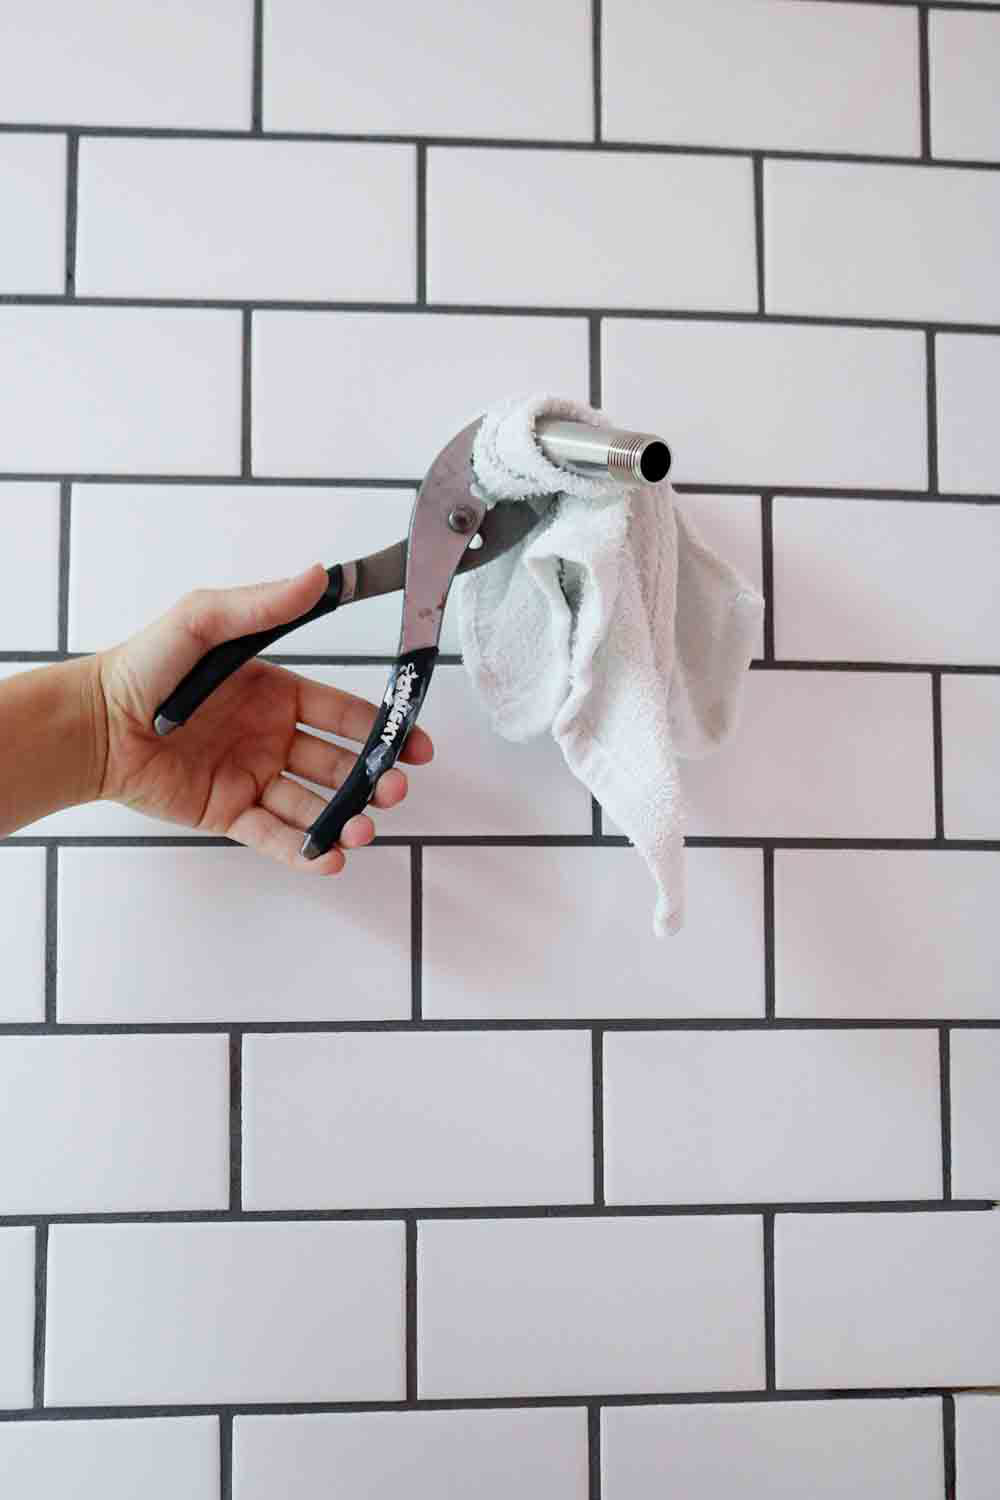 A person using pliers to remove an old shower head from a tile wall.